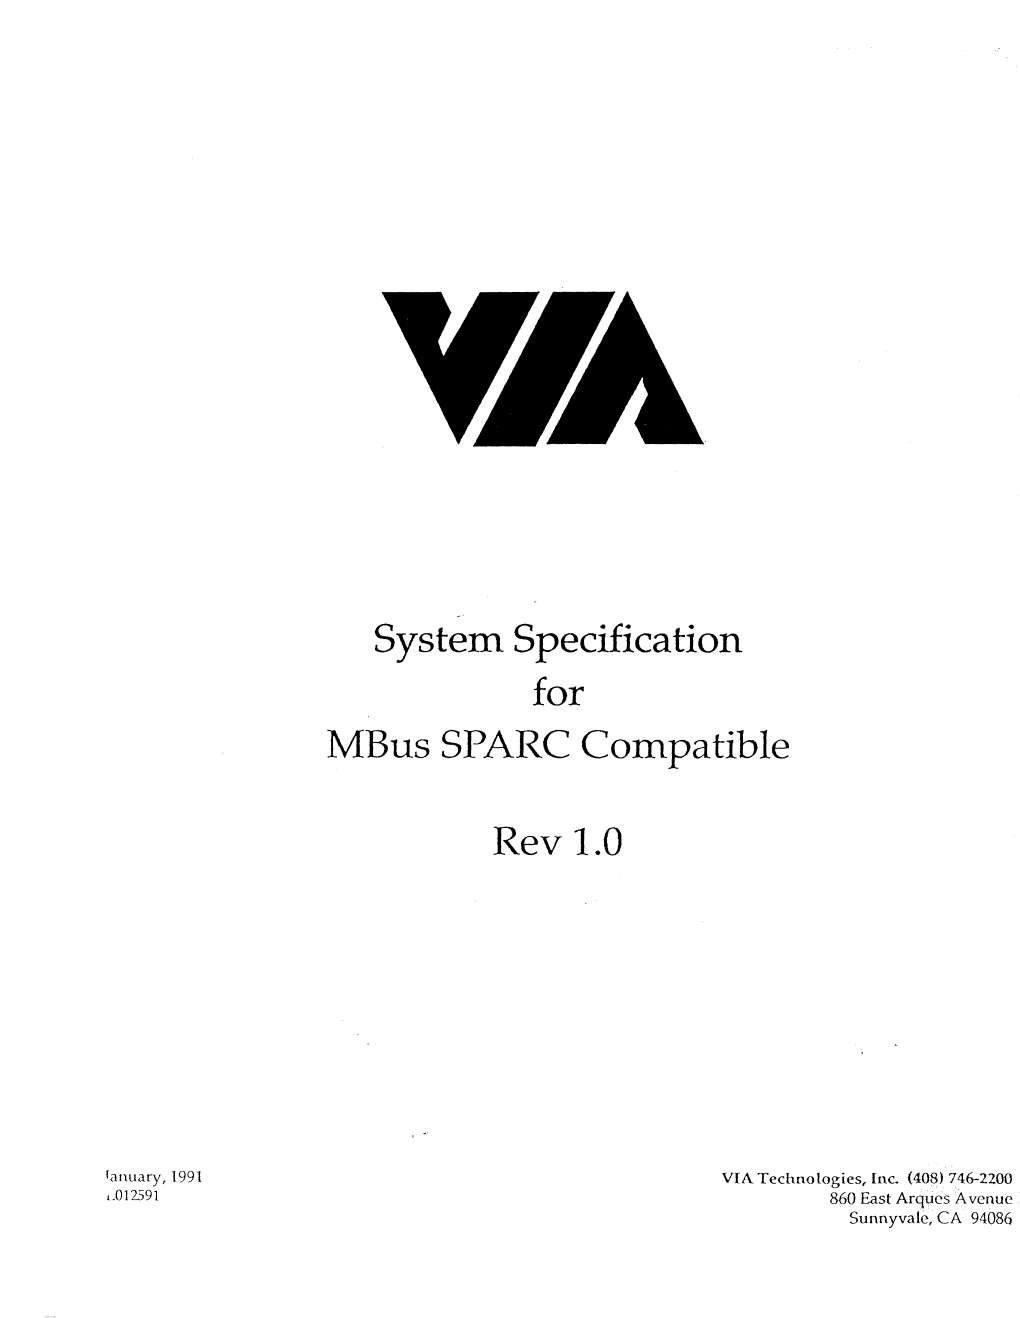 System Specification for Mbus SPARC Compatible Rev